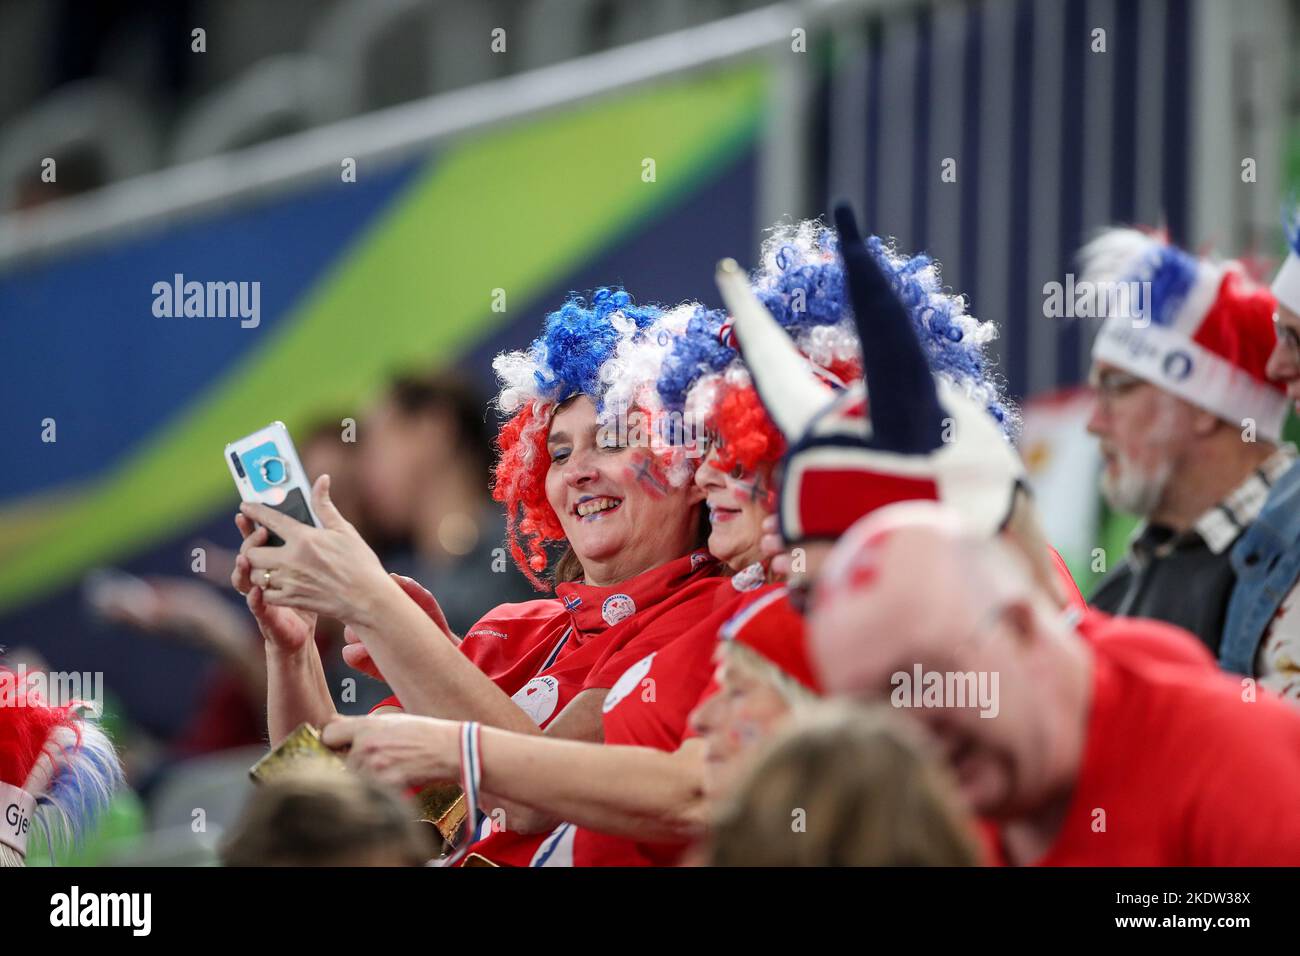 Ljubljana, Slovenia. 08th Nov, 2022. LJUBLJANA, SLOVENIA - NOVEMBER 08: Norway  Supporters cheer in the stands during EHF European Women's Handball  Championship match between Norway and Hungary at Arena Stozice on November